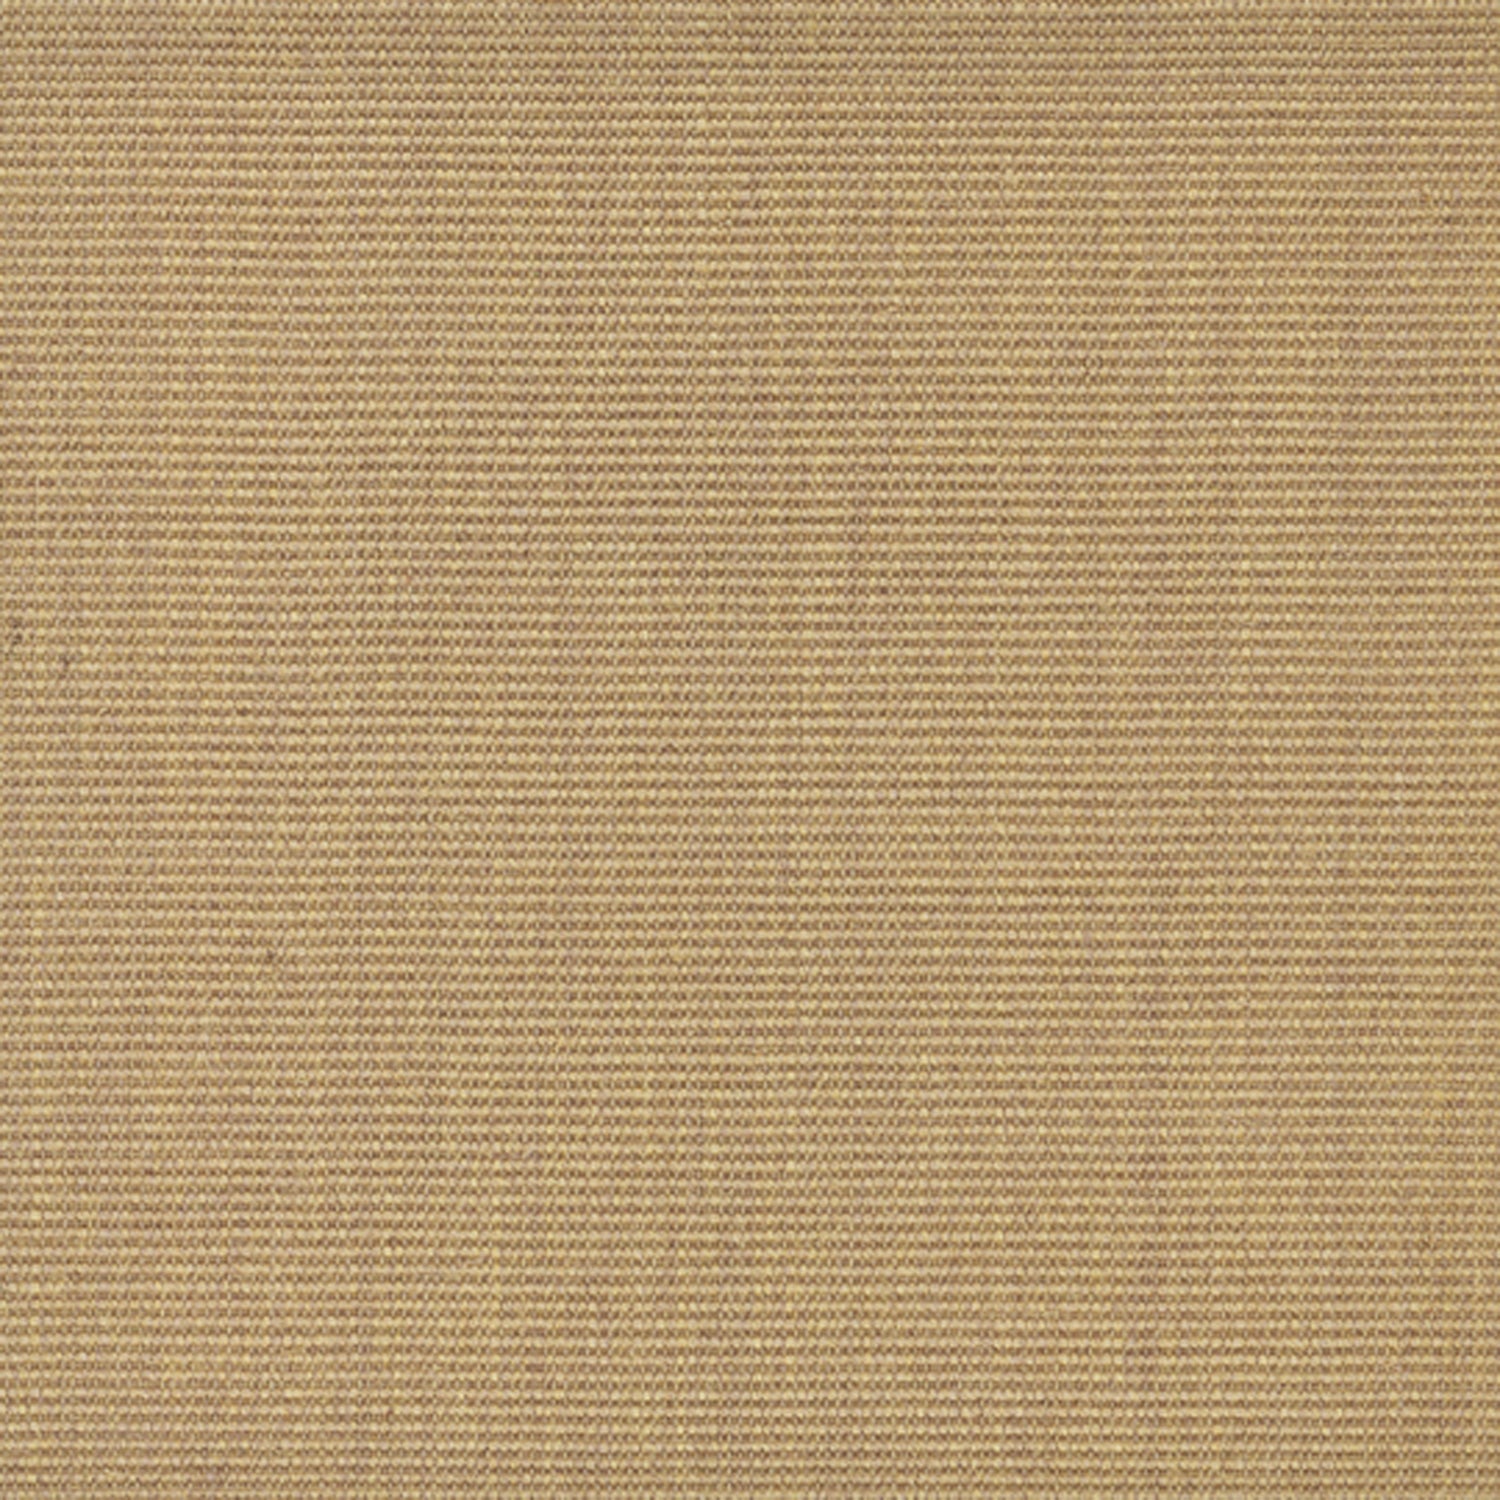 Sisal broadloom carpet swatch in a ribbed weave in "Essential Gray" gold.